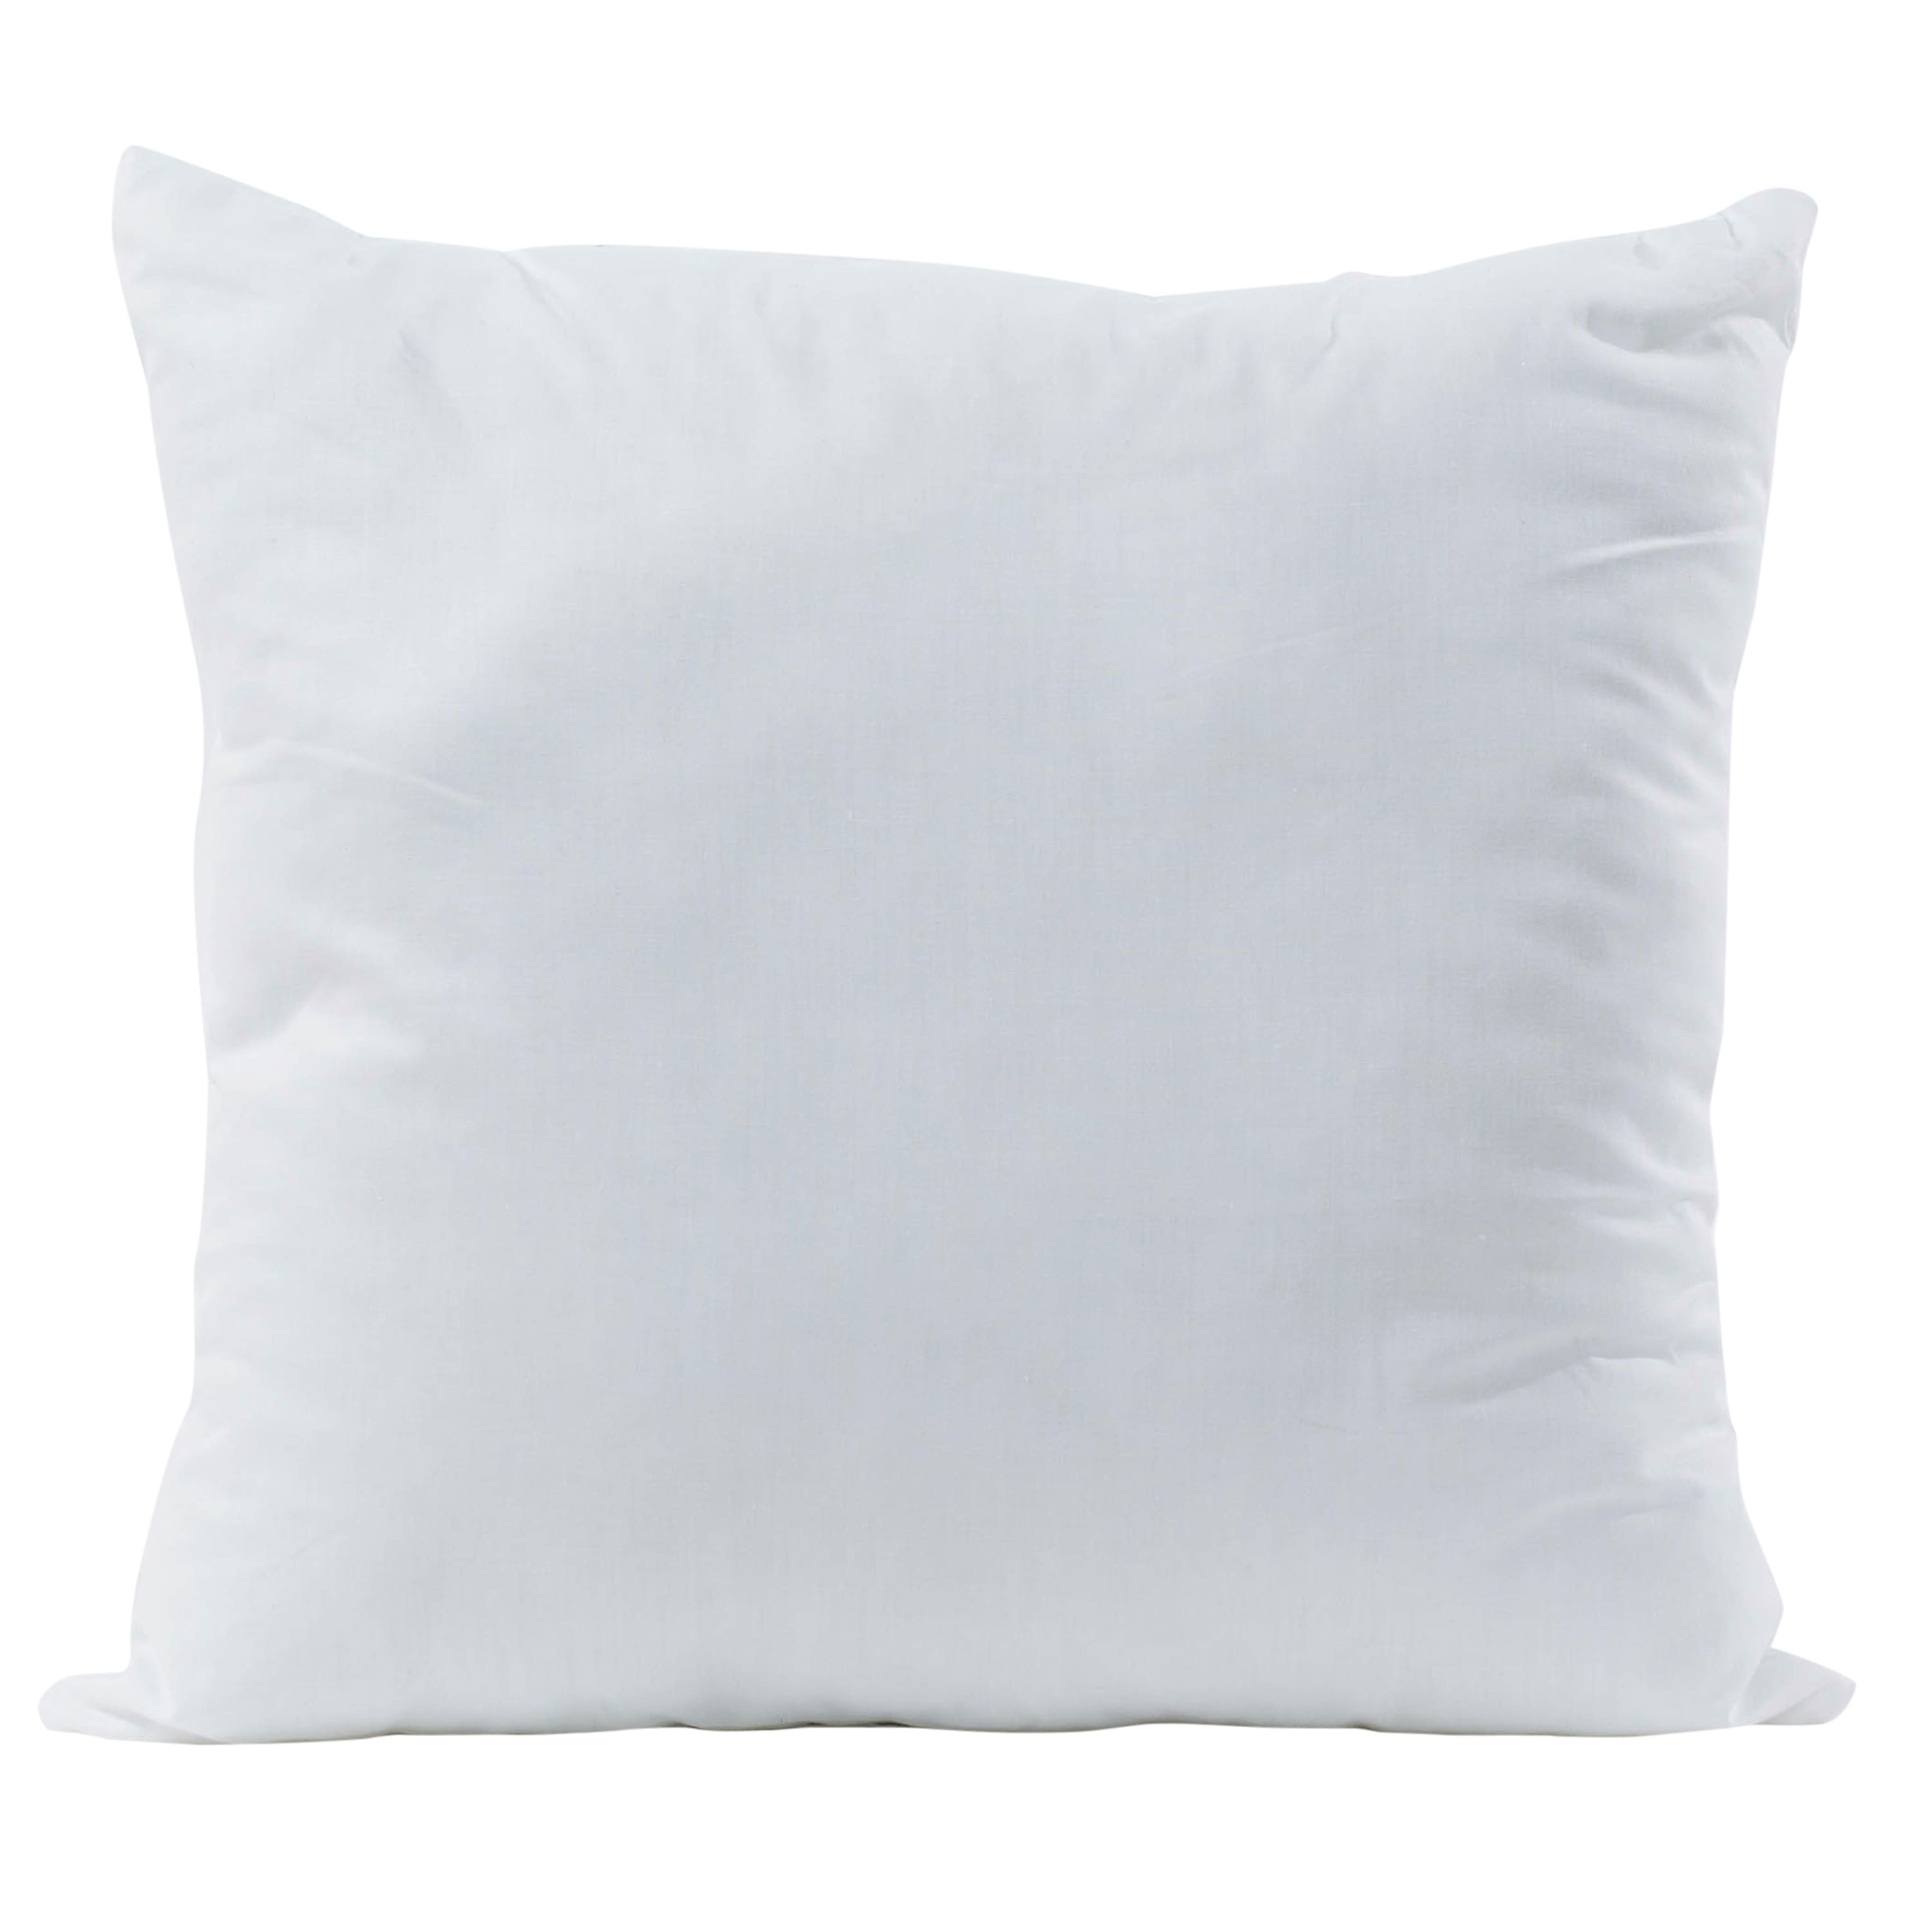 Crafter's Choice 24ct. Pillow Insert, 16 x 16 by Fairfield | Michaels